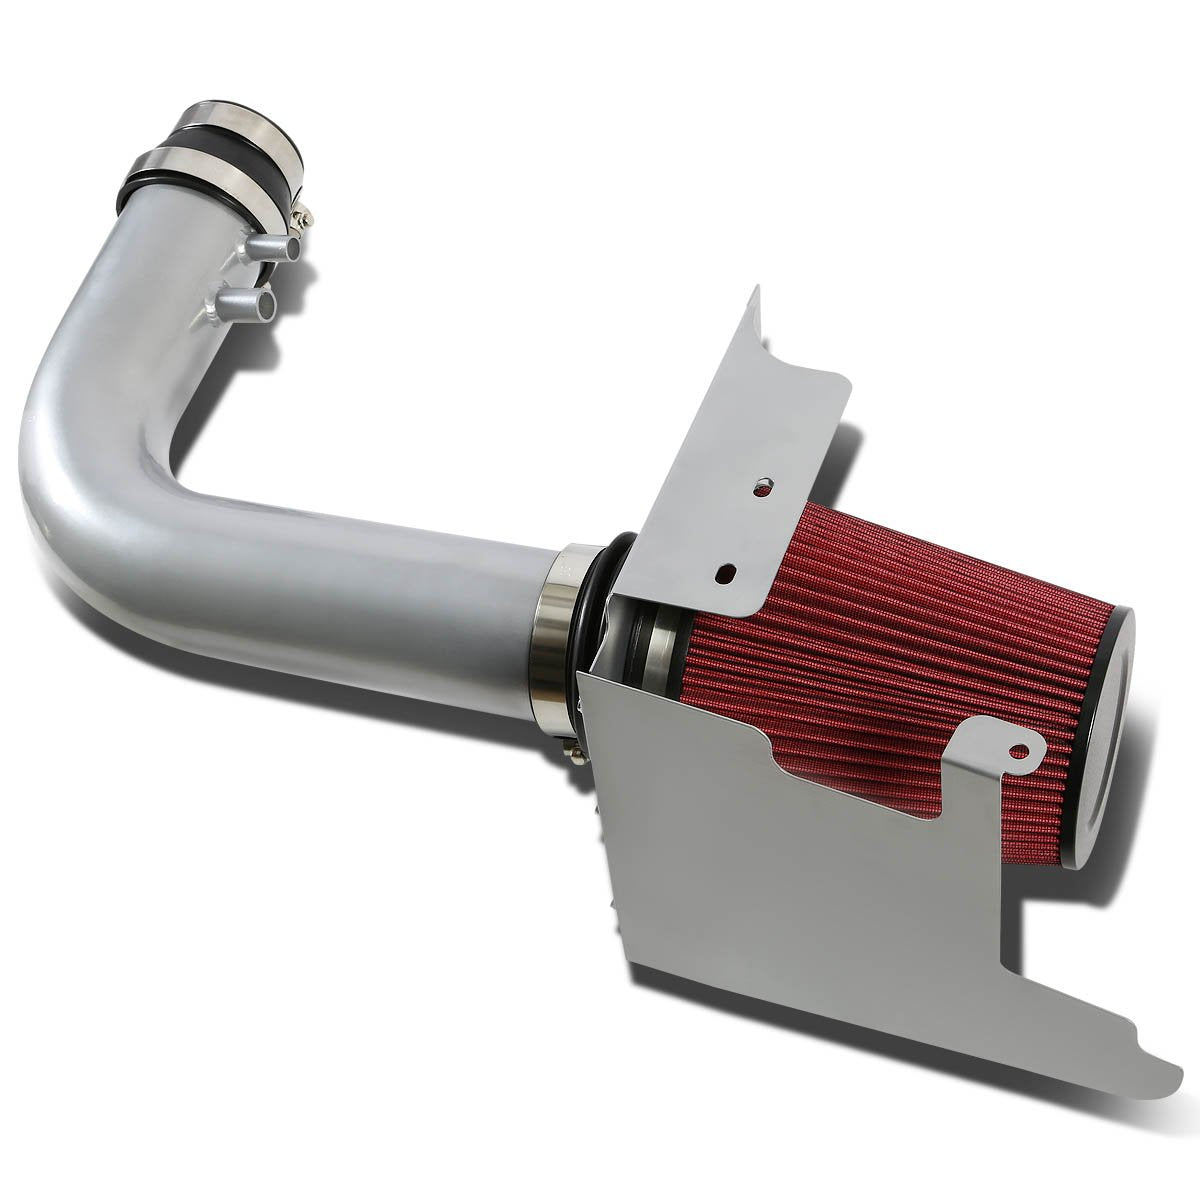 97-03 Ford F150 Expedition 4.6L 5.4L Aluminum Cold Air Intake w/Heat Shield+Filter - Silver